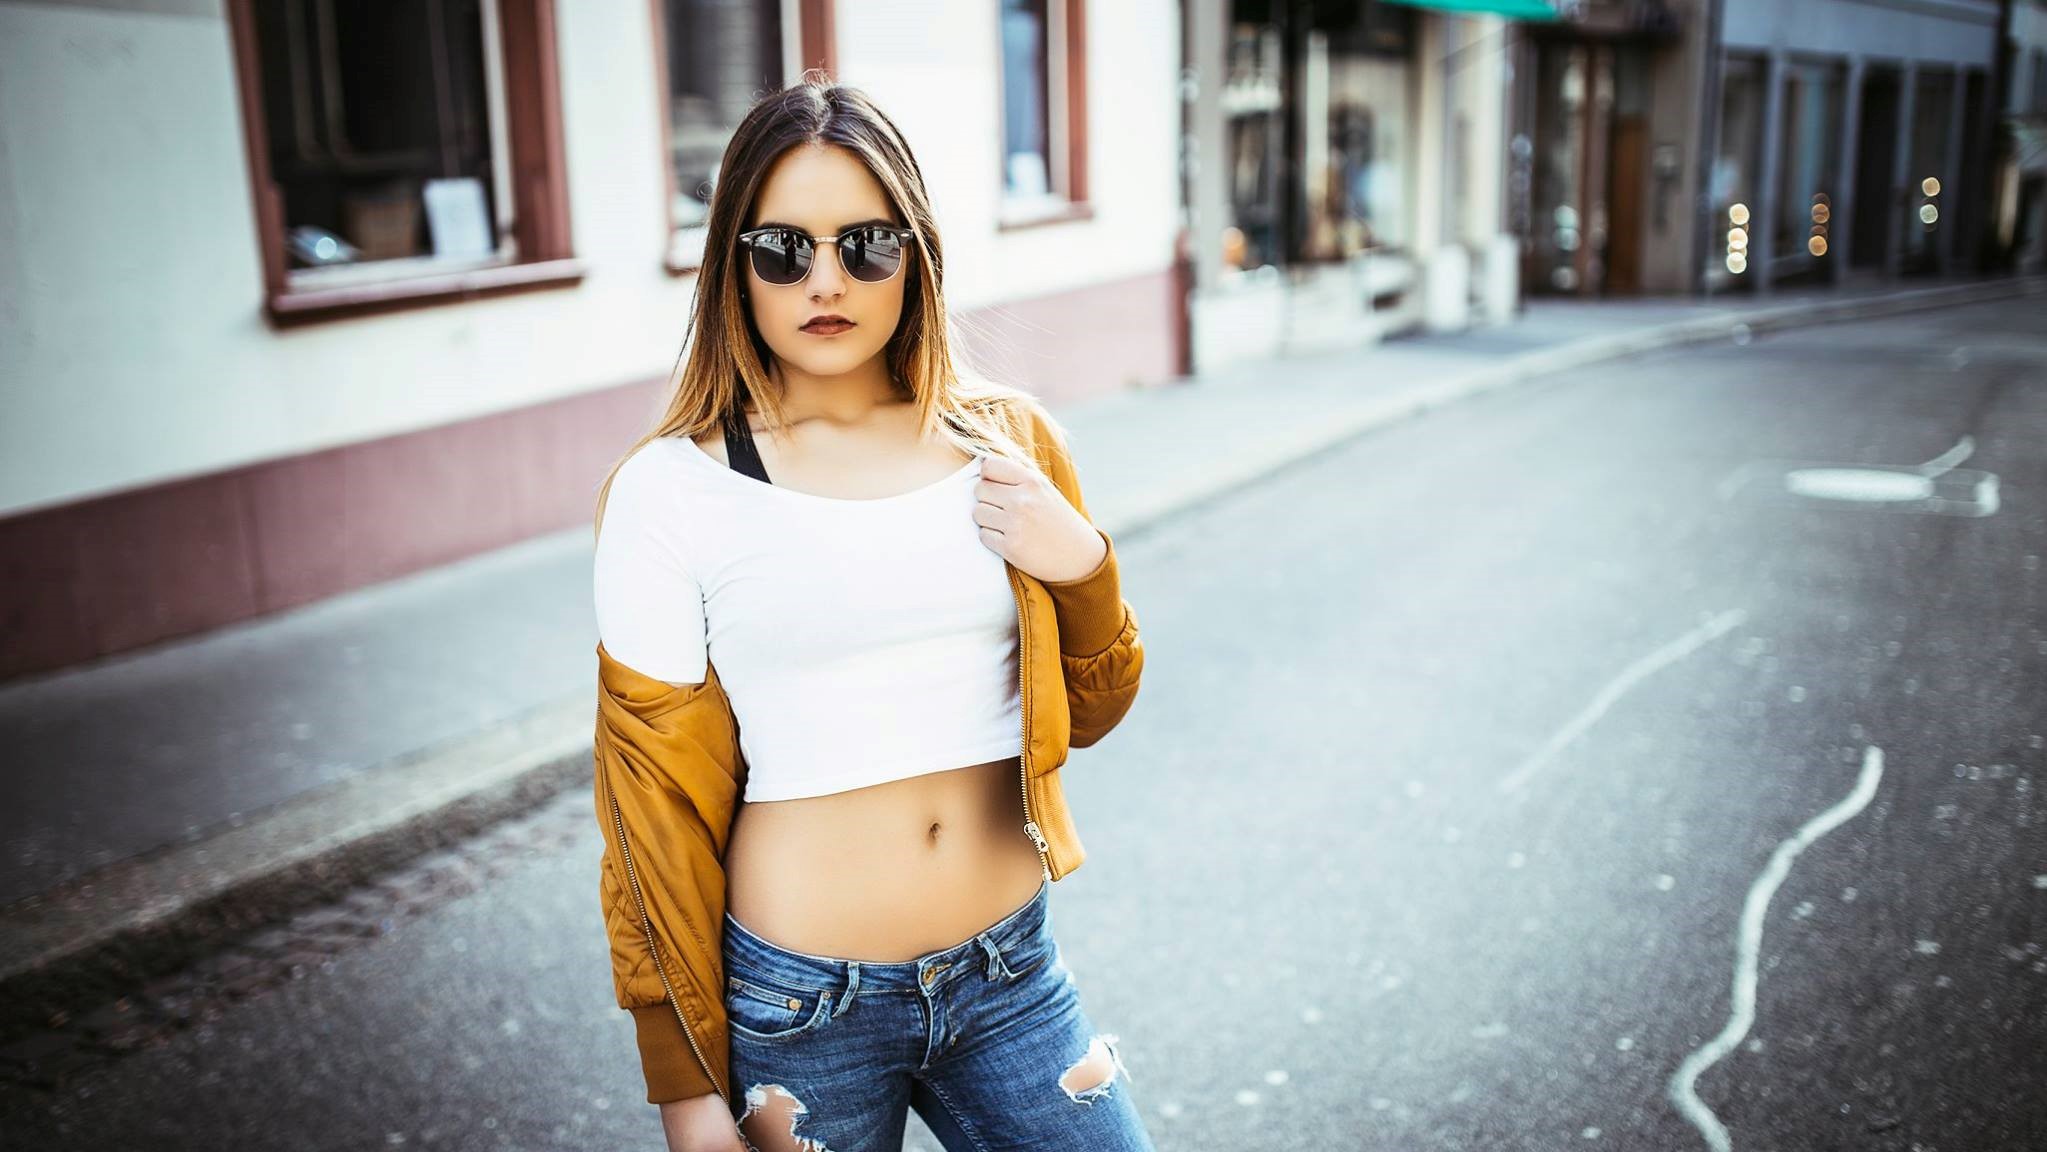 People 2047x1152 bare midriff crop top belly belly button low rise jeans innie navel model depth of field photography fashion photography fashion Aurelia Giuliano women with shades red lipstick urban outdoors women outdoors standing street orange jacket women